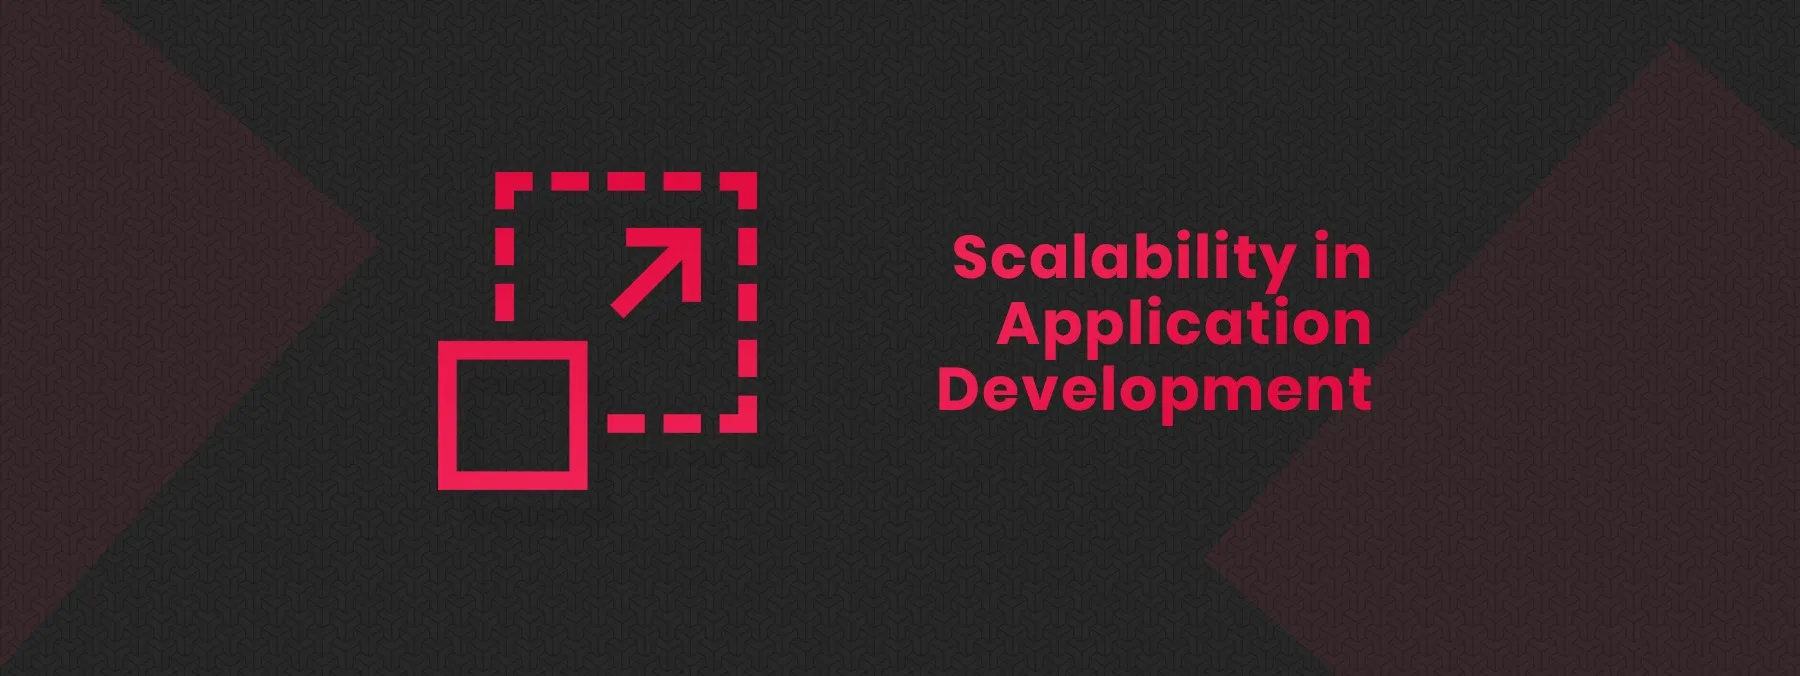 Importance of Scalability in Application Development